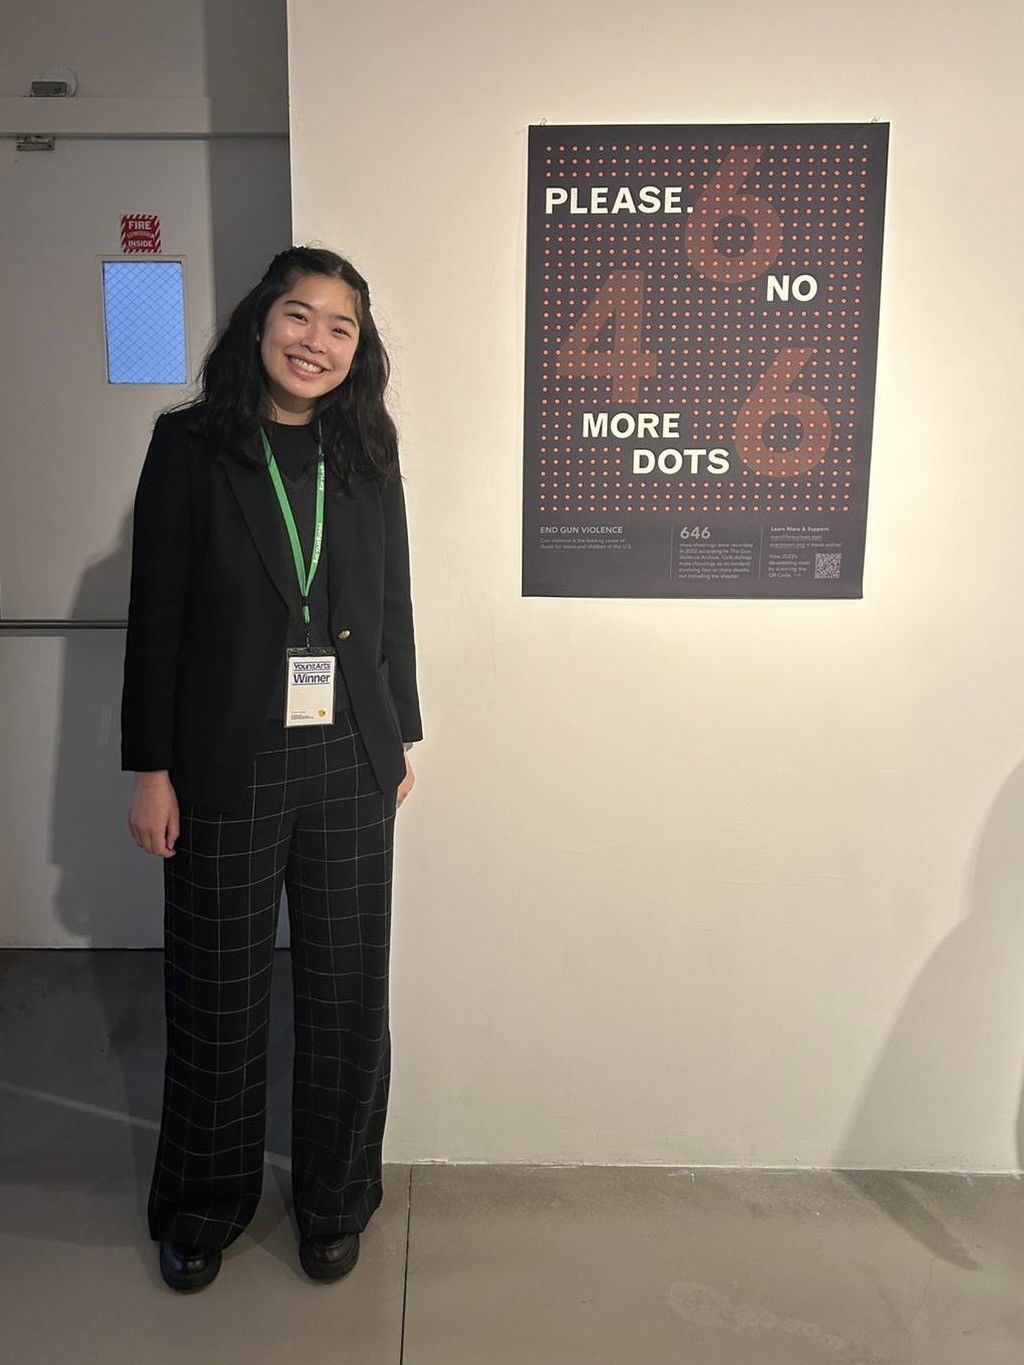 Cheng+receives+national+recognition+for+art